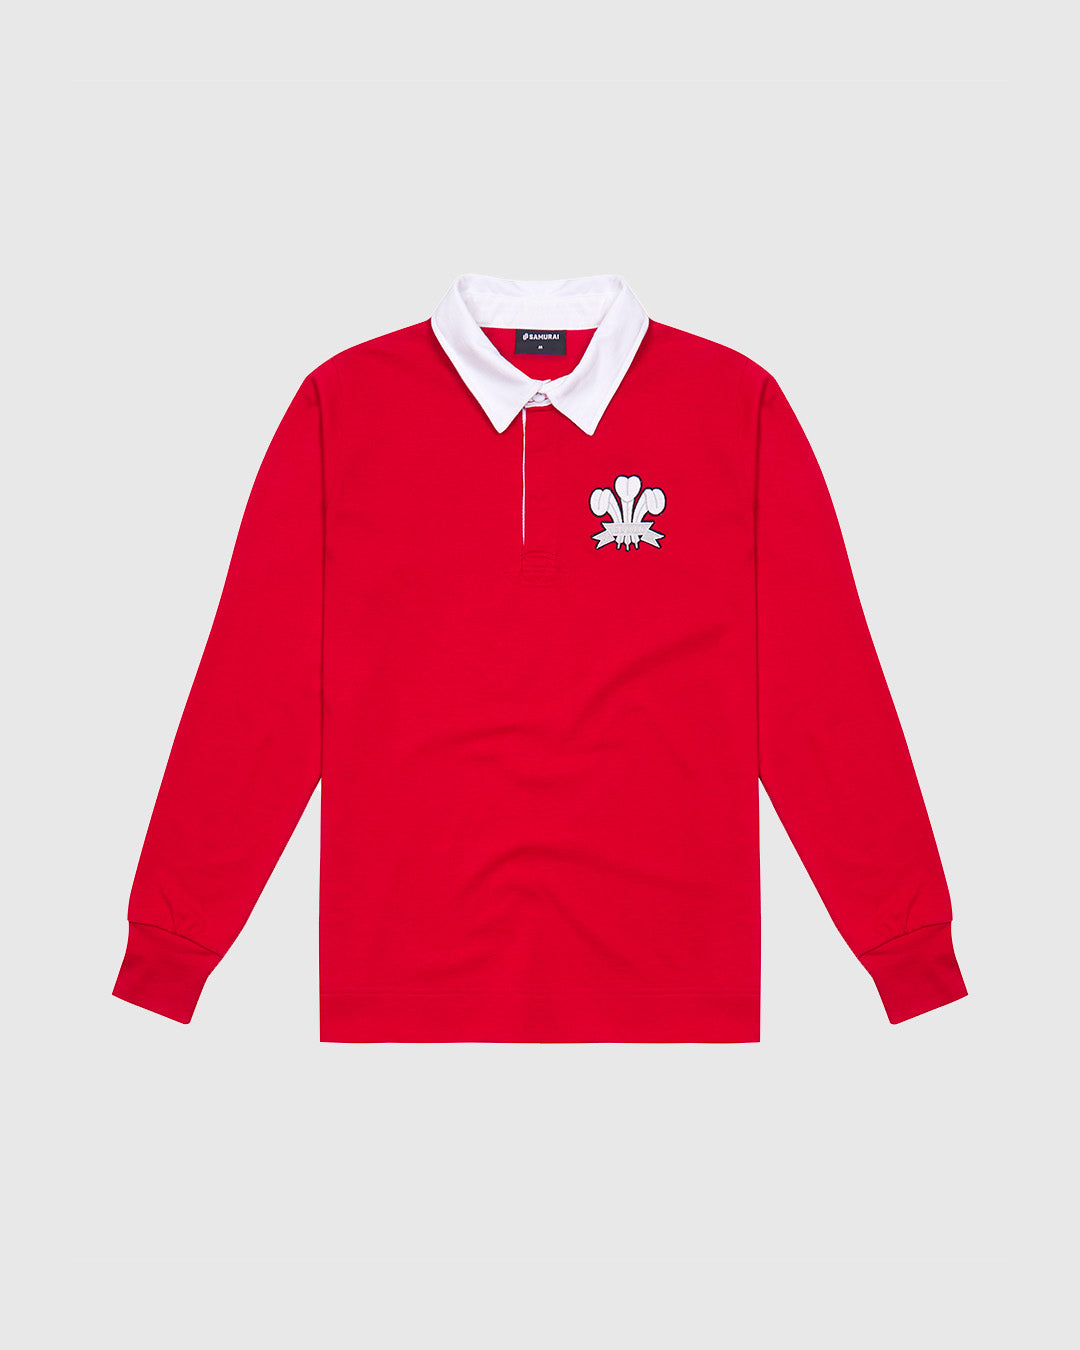 VC: GB-WLS - Vintage Rugby Shirt - Wales